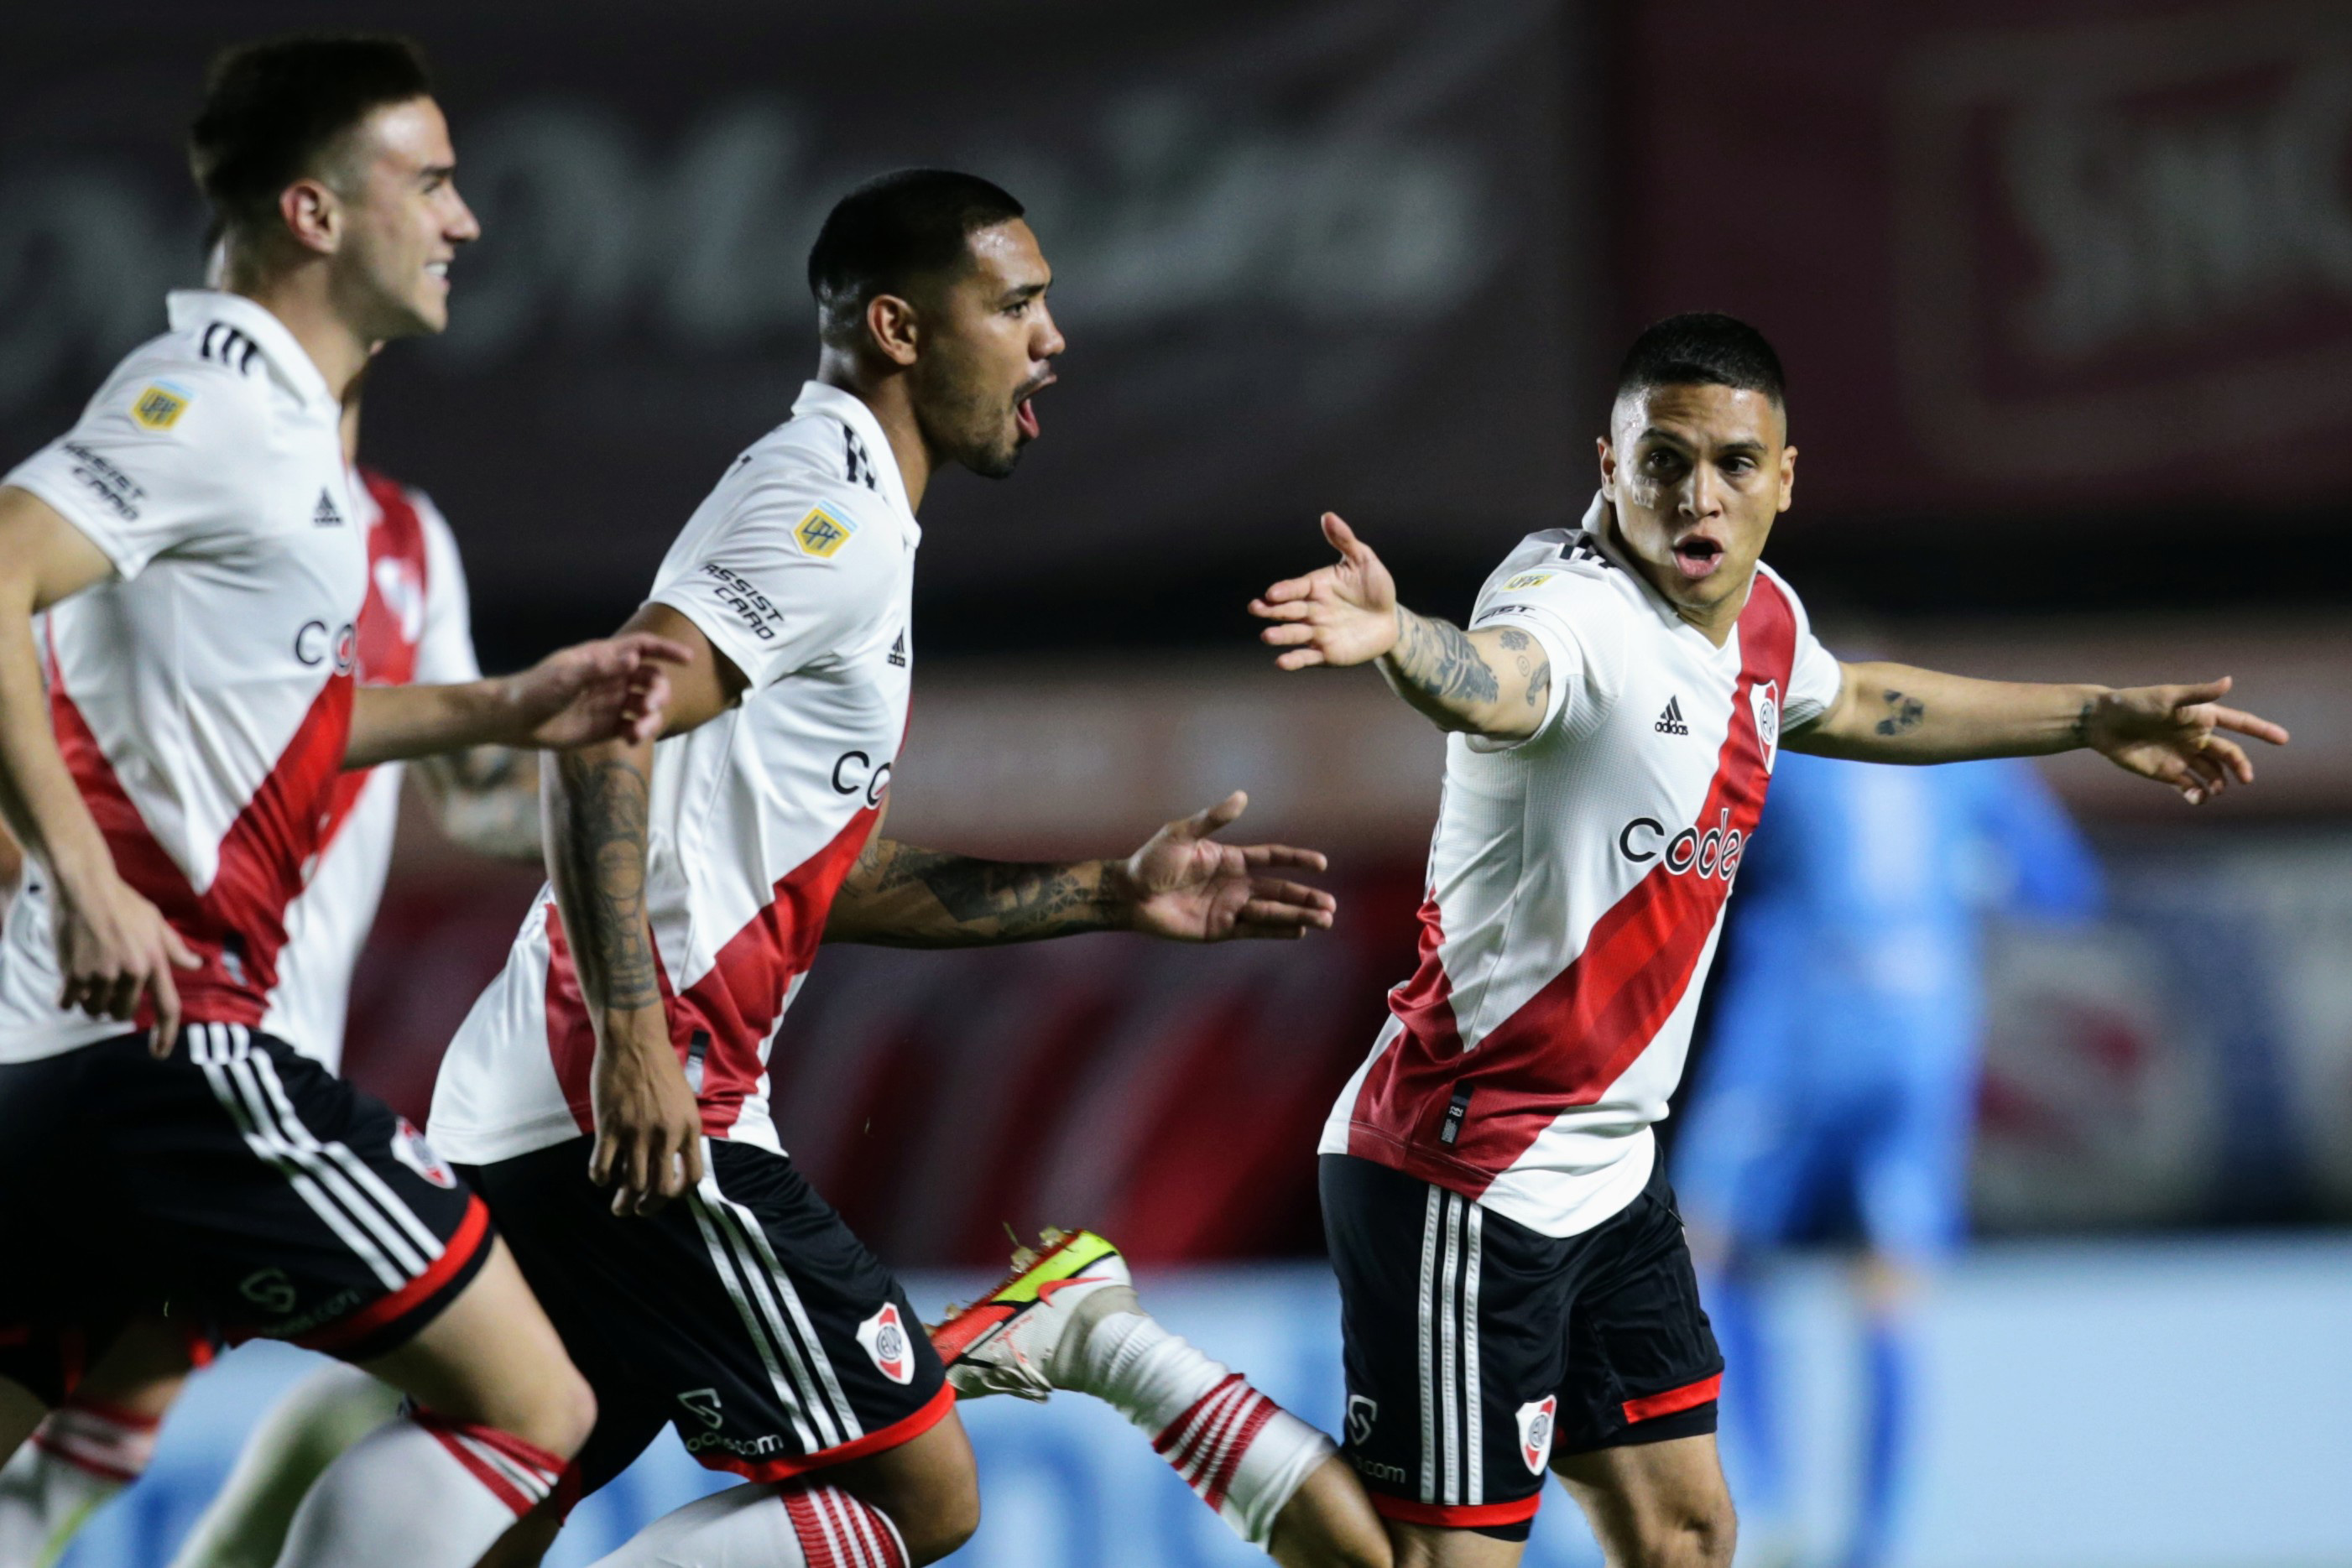 Juan Fernando Quintero shouts River's first goal in the 3-0 victory against Argentinos Juniors at La Paternal (Photo Baires)